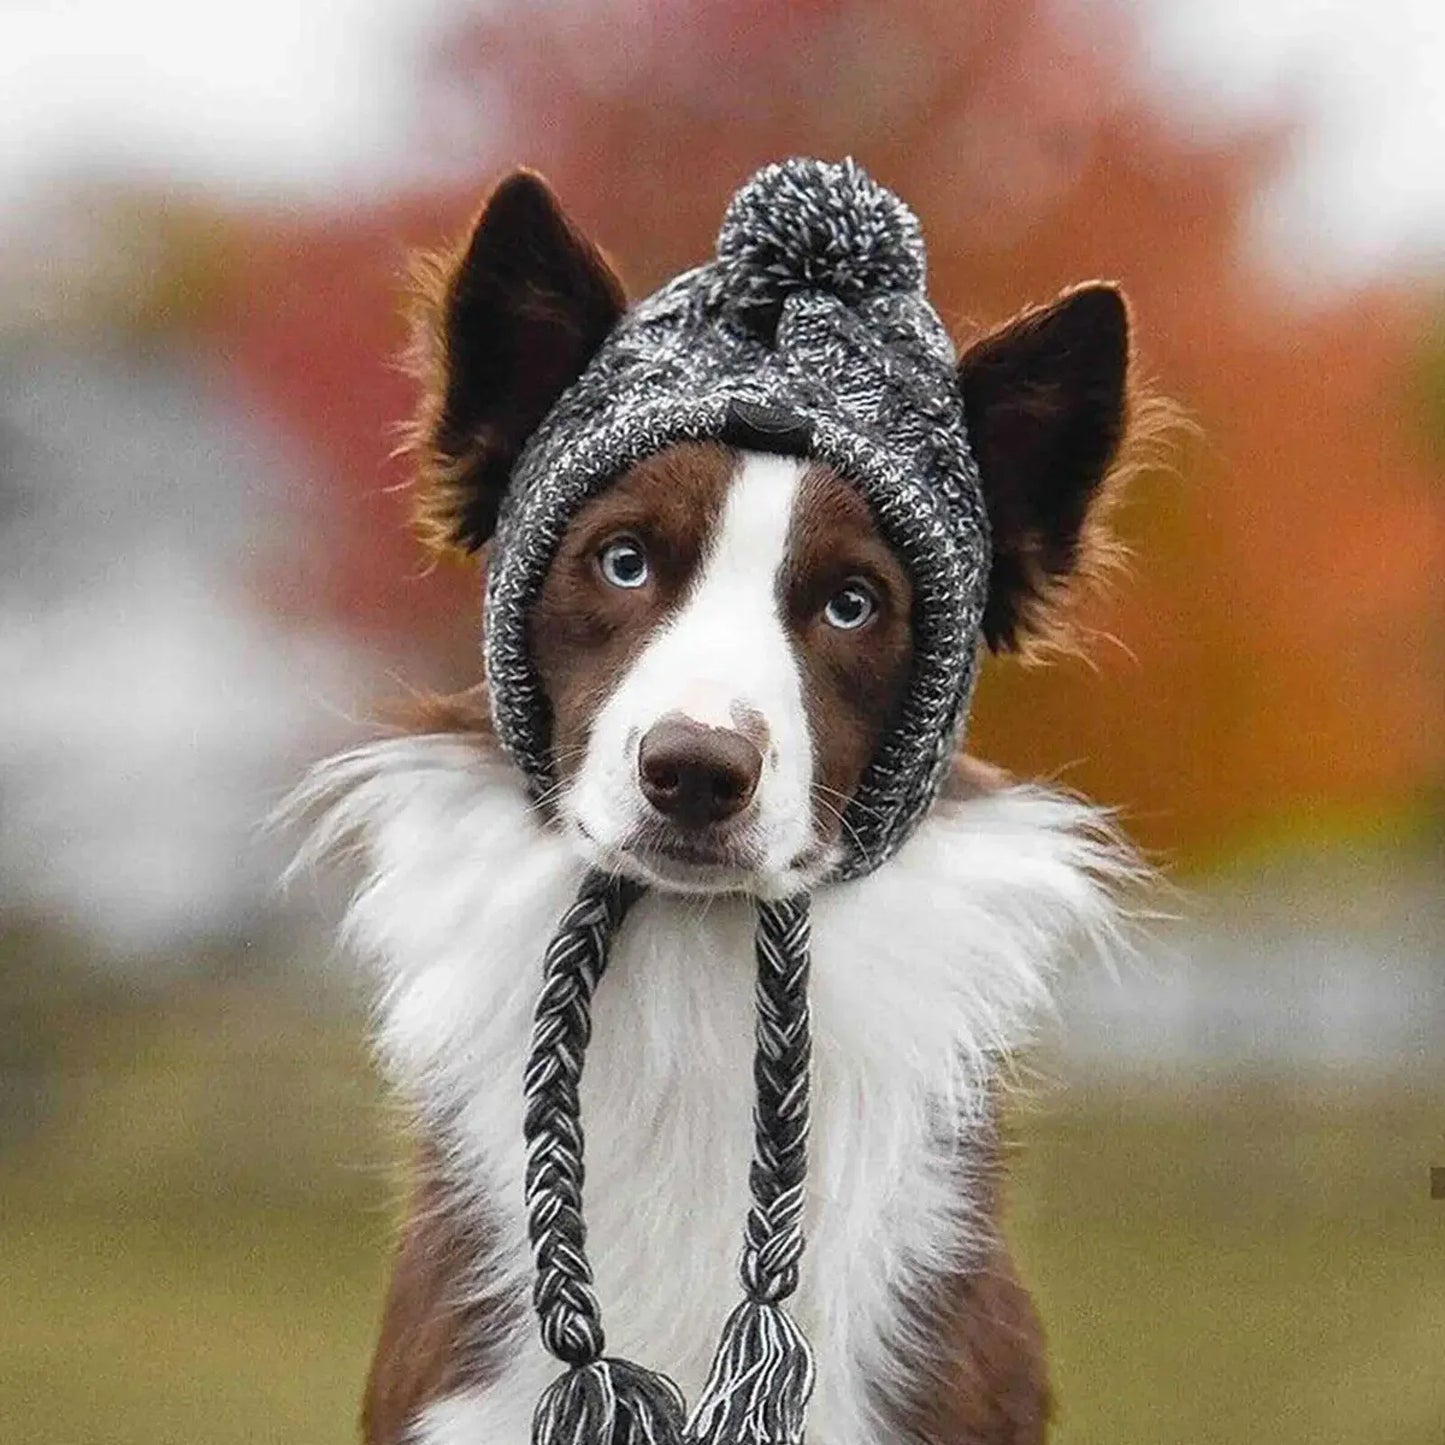 PAW CAP™ | Winter hat for dogs